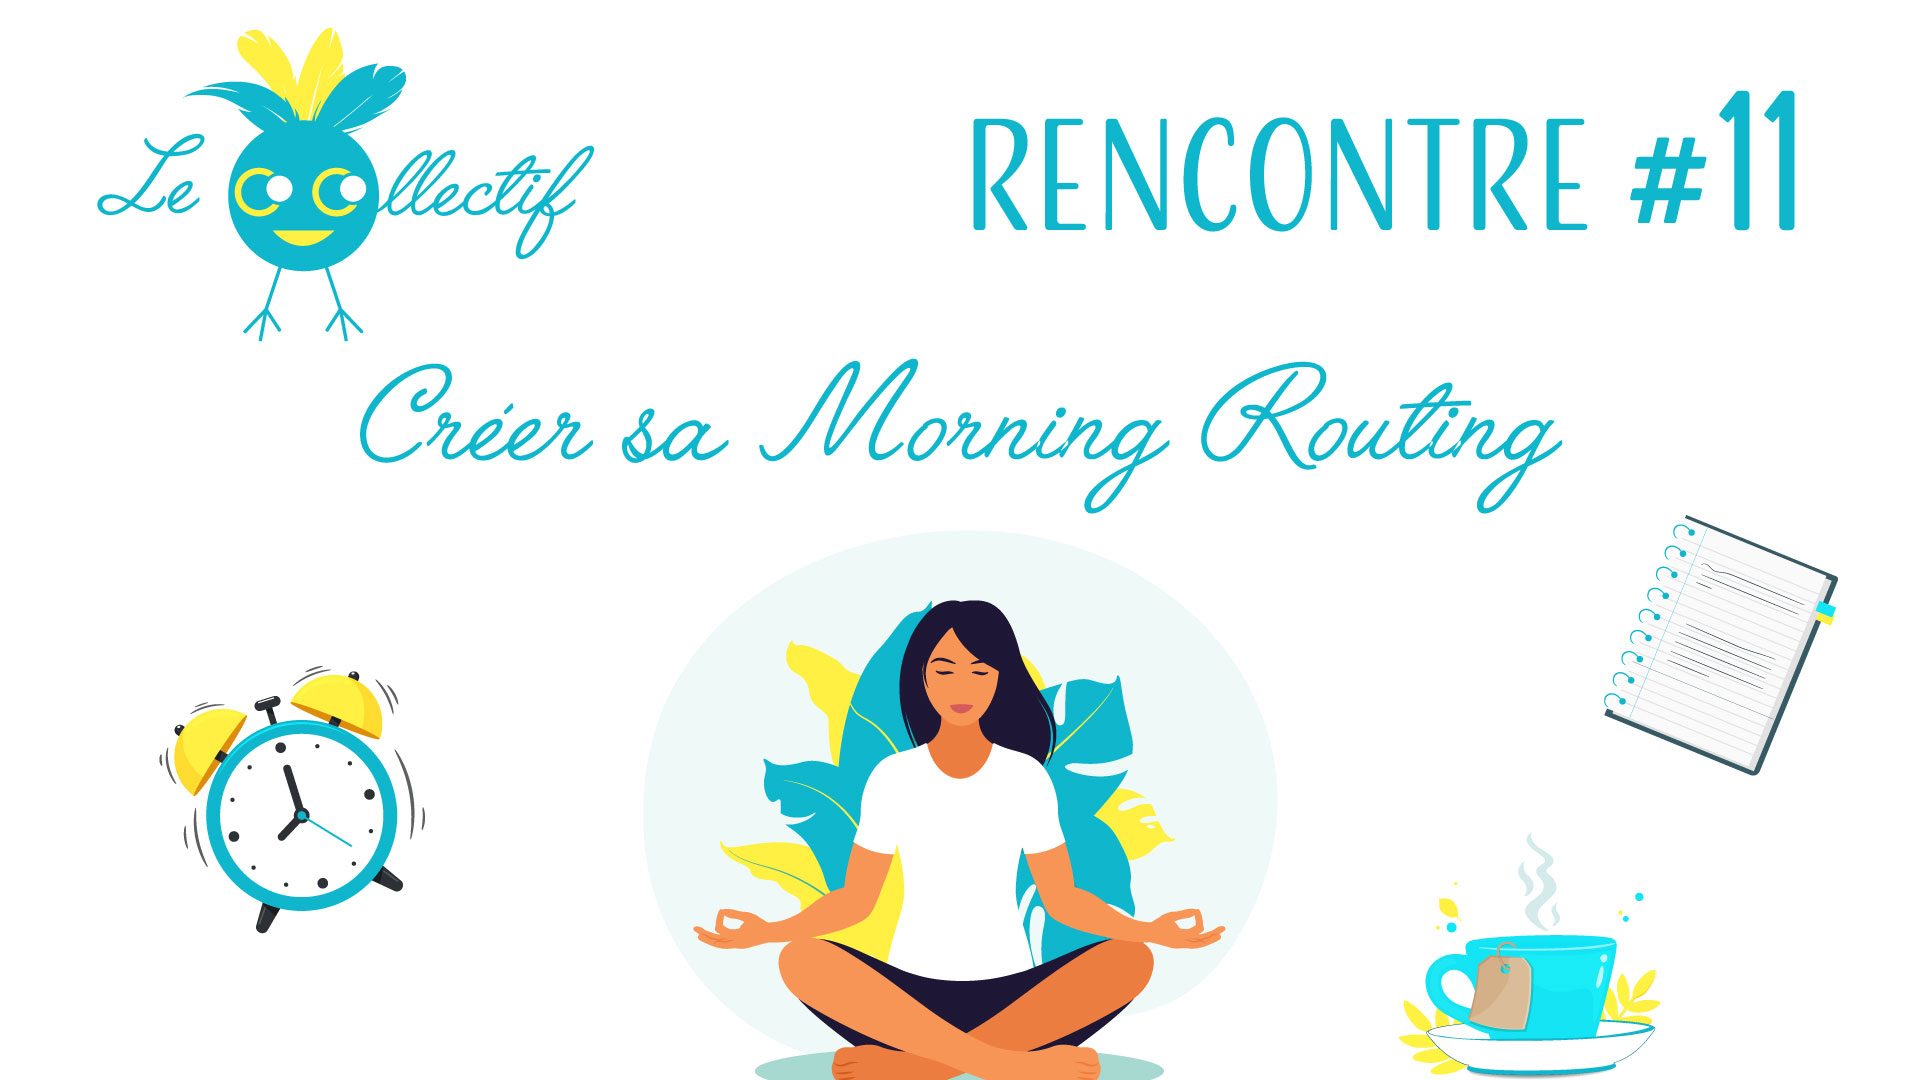 rencontre co-collectif #11 : créer sa morning routine 7 billeterie morning routing